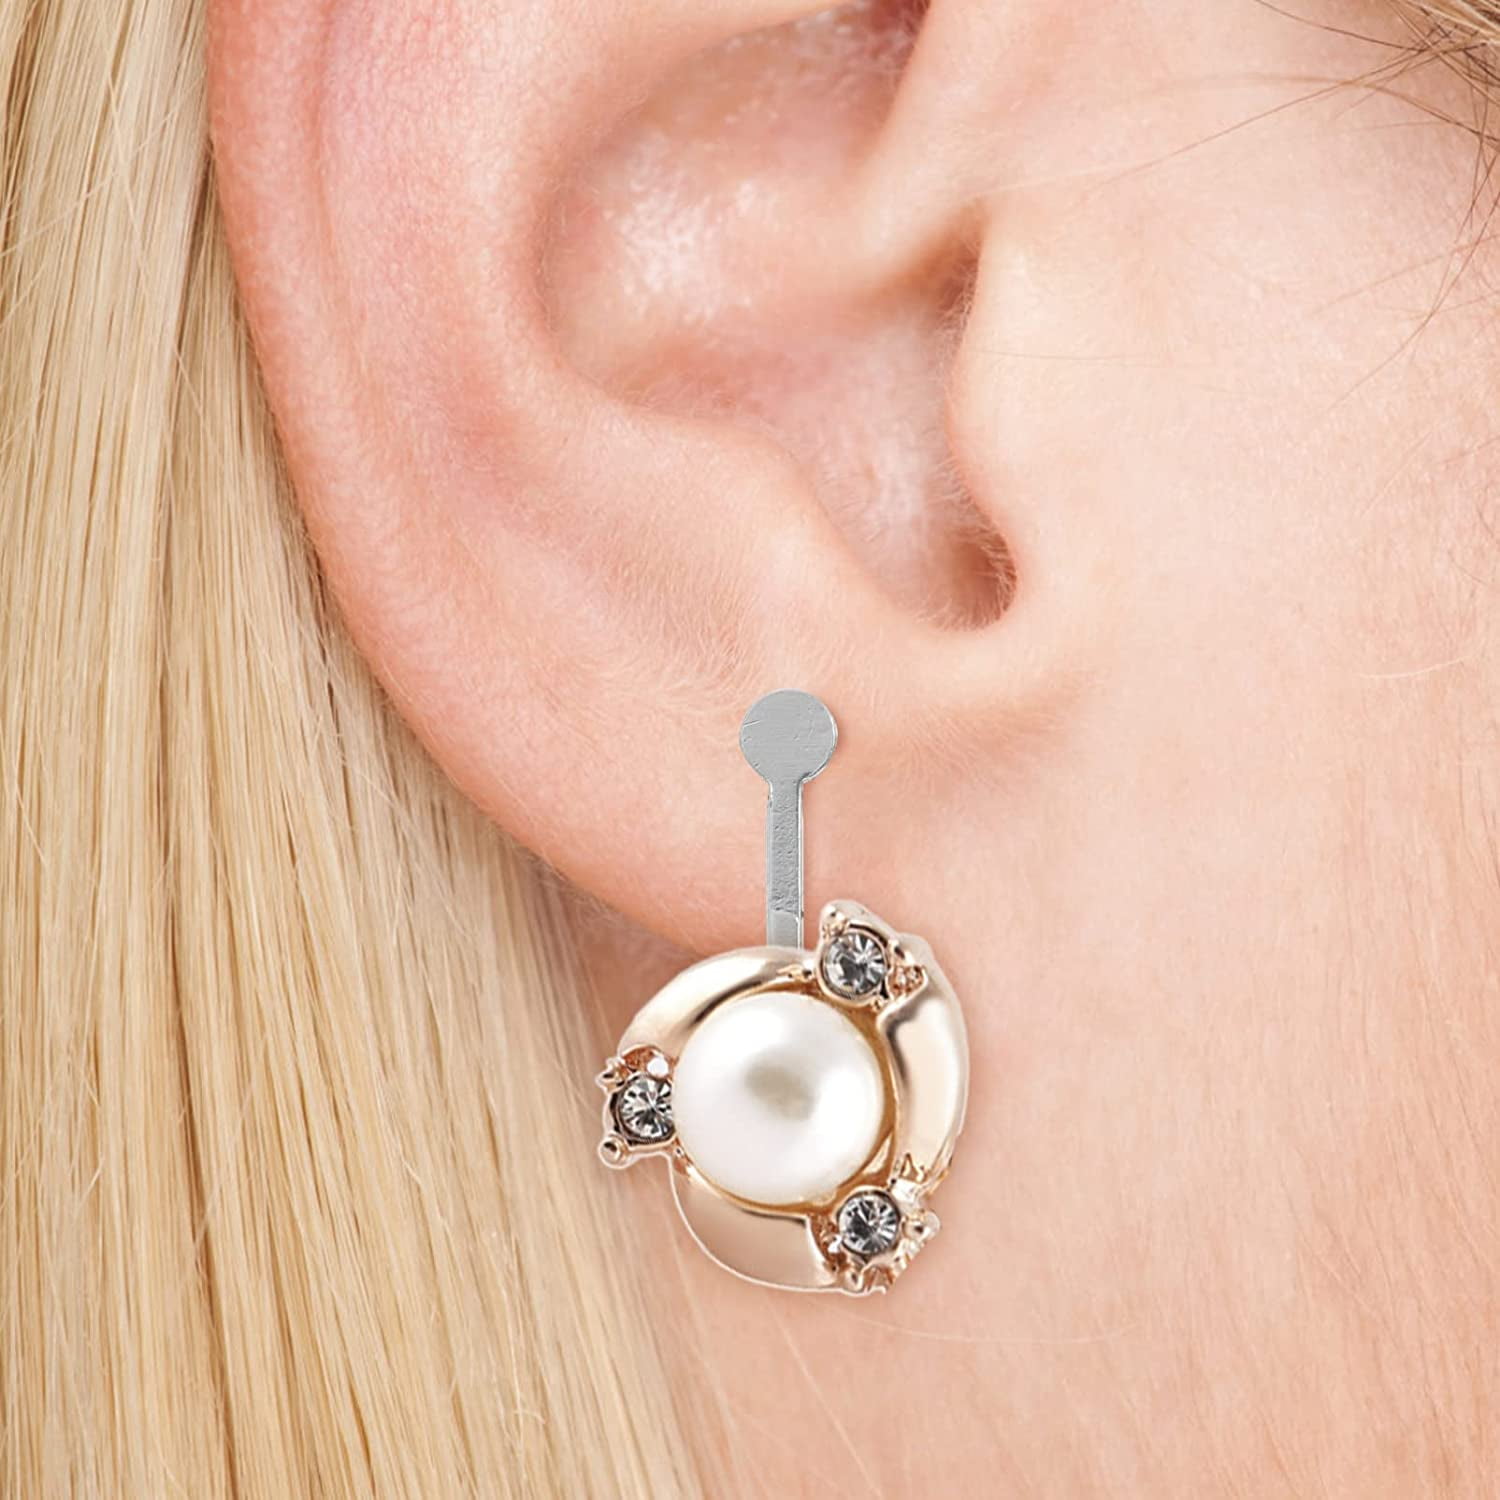 MP3828 Clip On Earring Backing 9mm CHOOSE COLOR BELOW